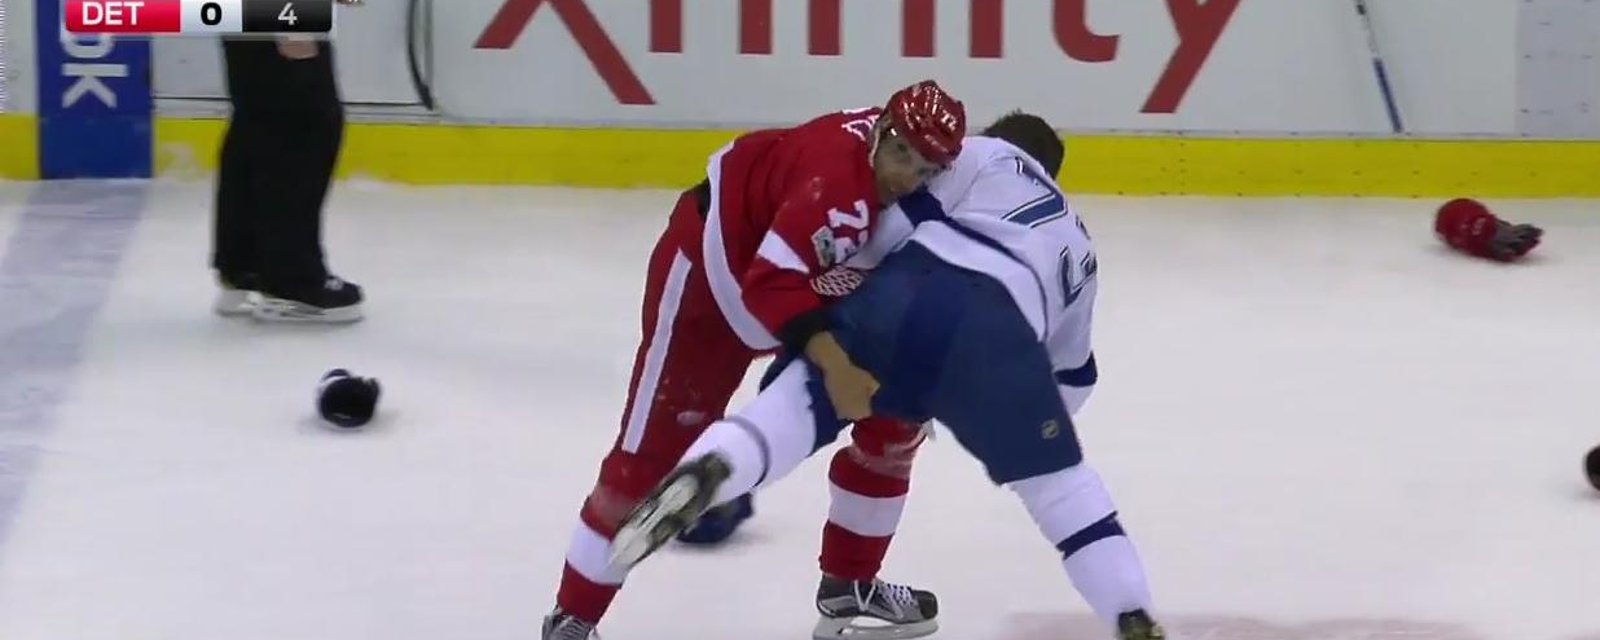 Athanasiou in MMA mode tonight. 